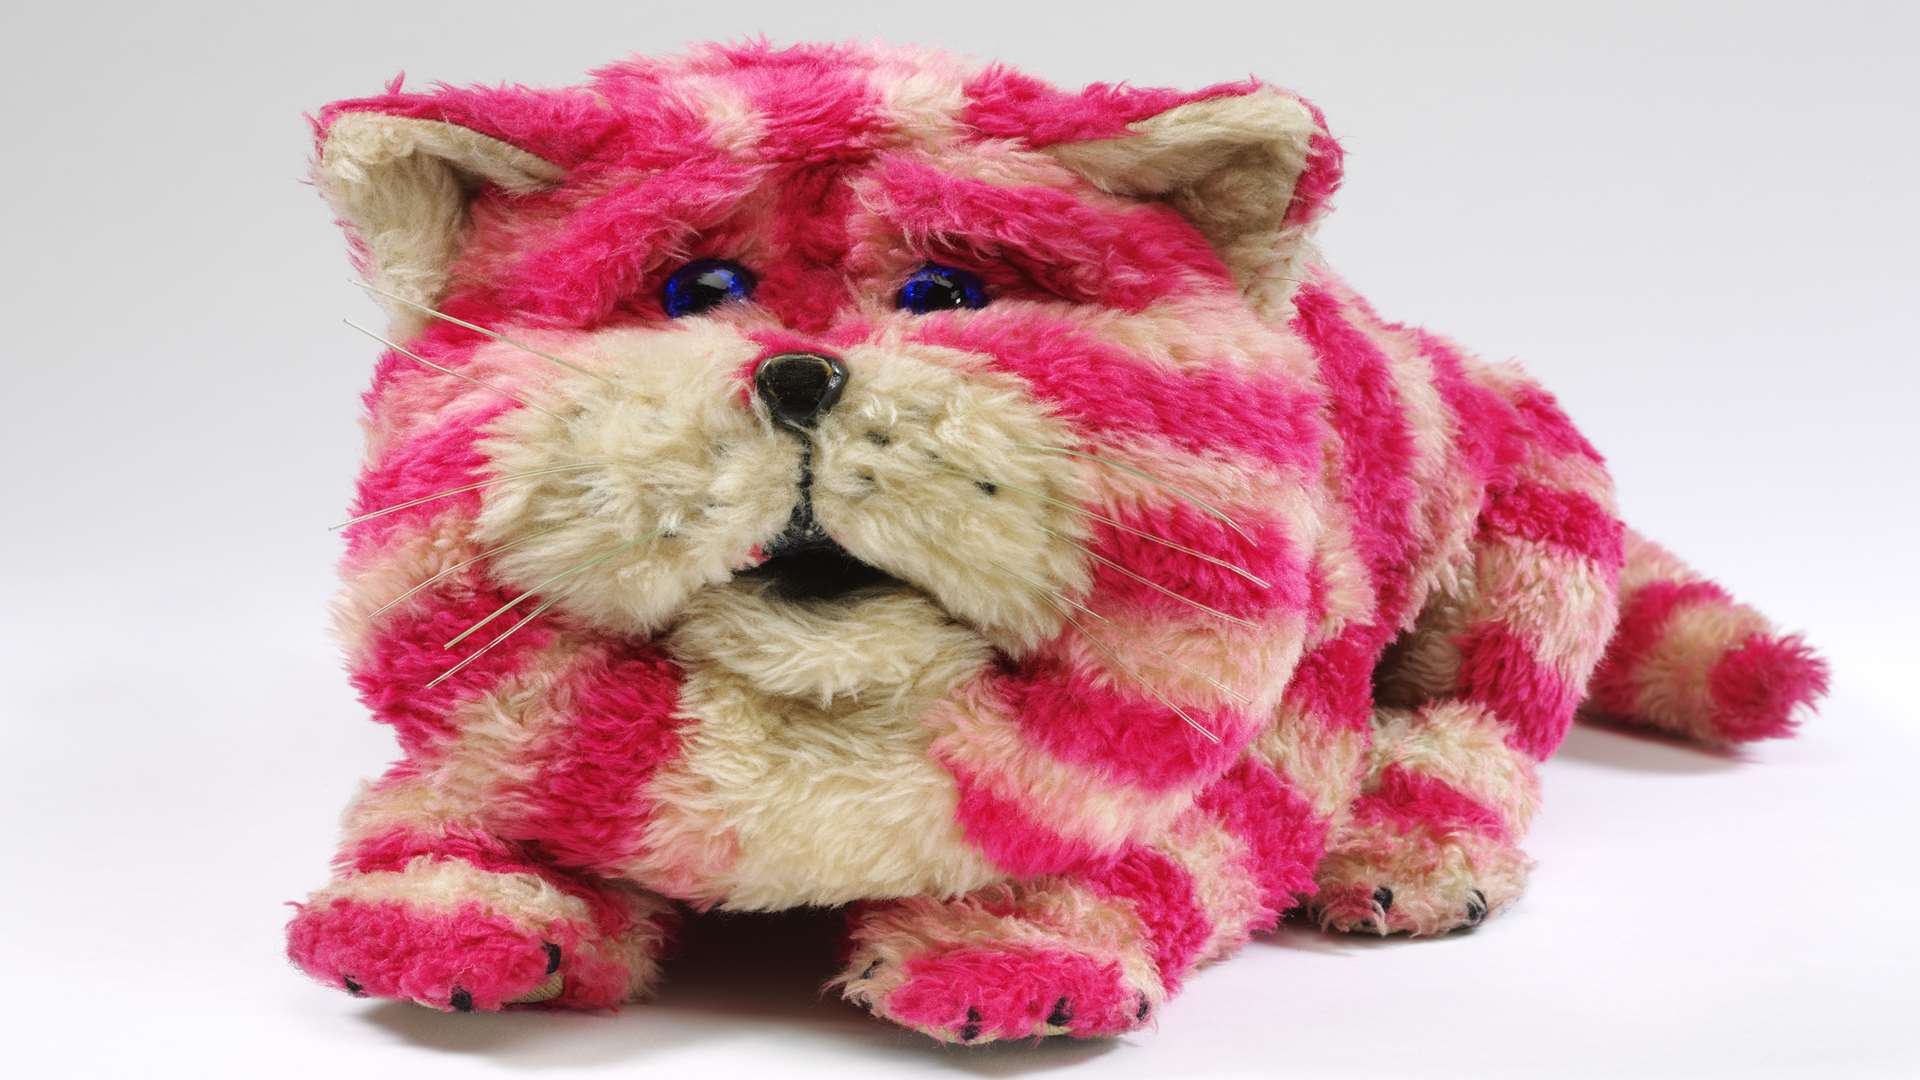 Bagpuss is at Sissinghurst Picture: ©Smallfilms, ©Victoria and Albert Museum, London